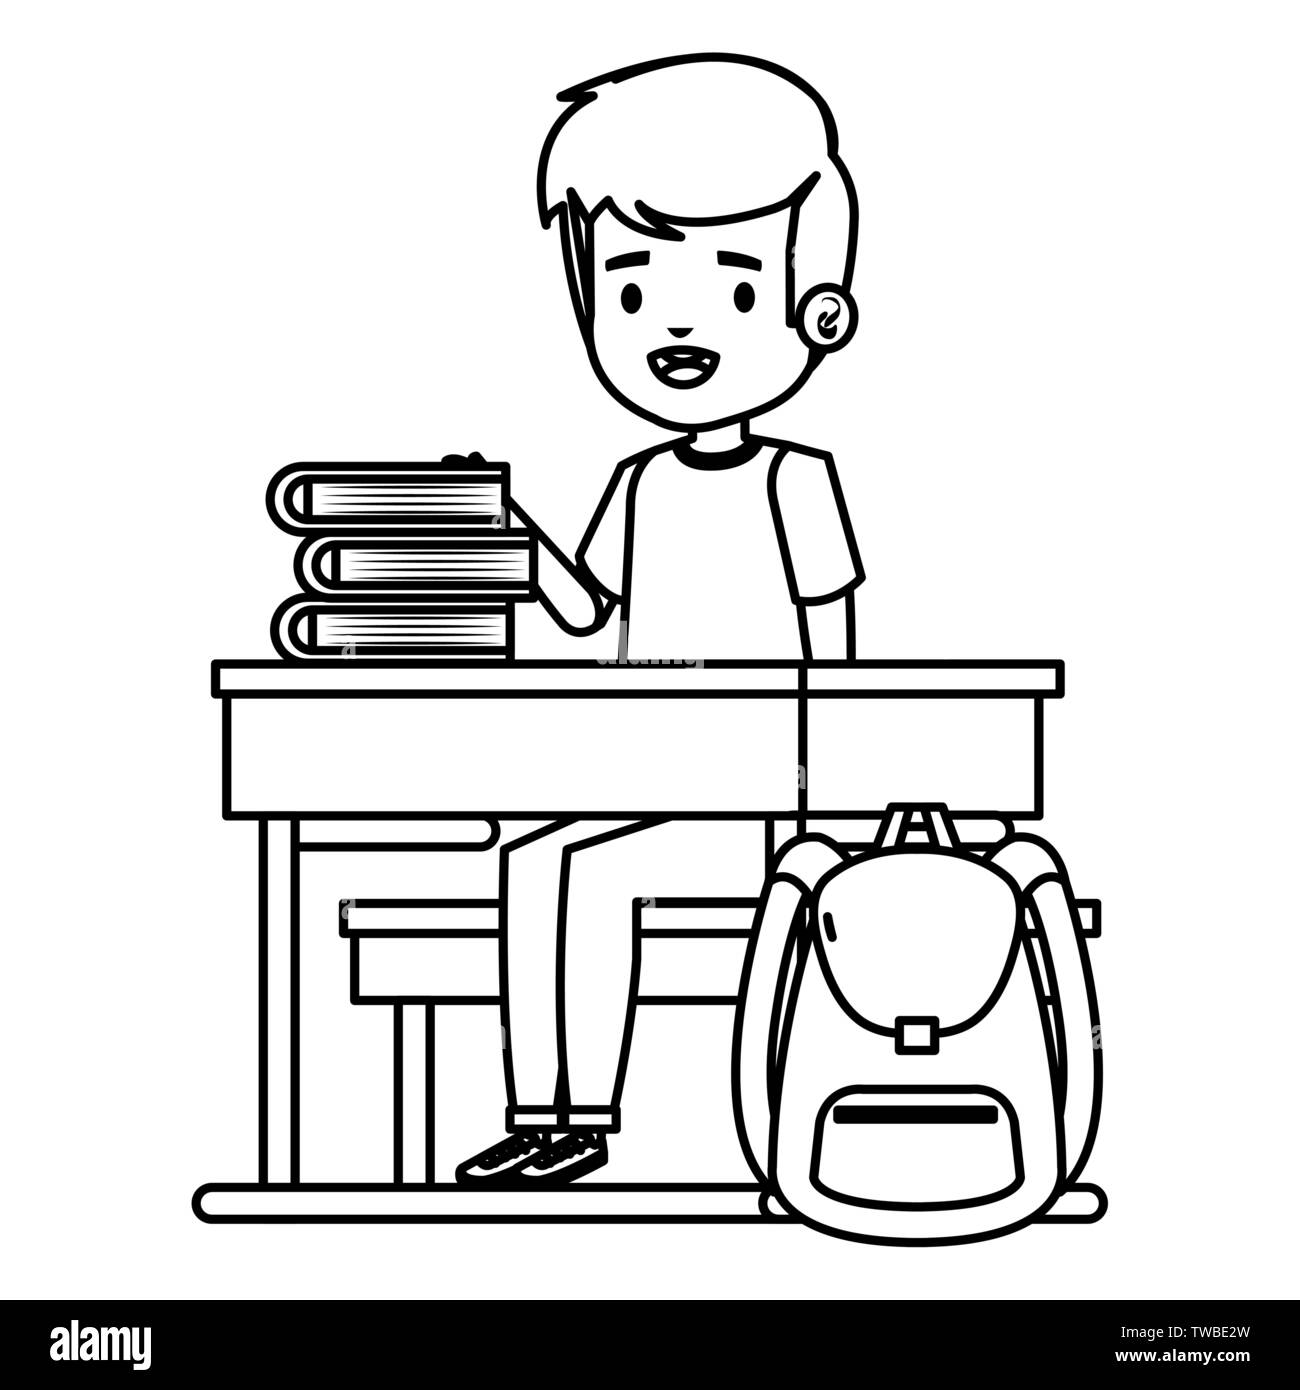 student boy seated in school desk with books and bag Stock Vector